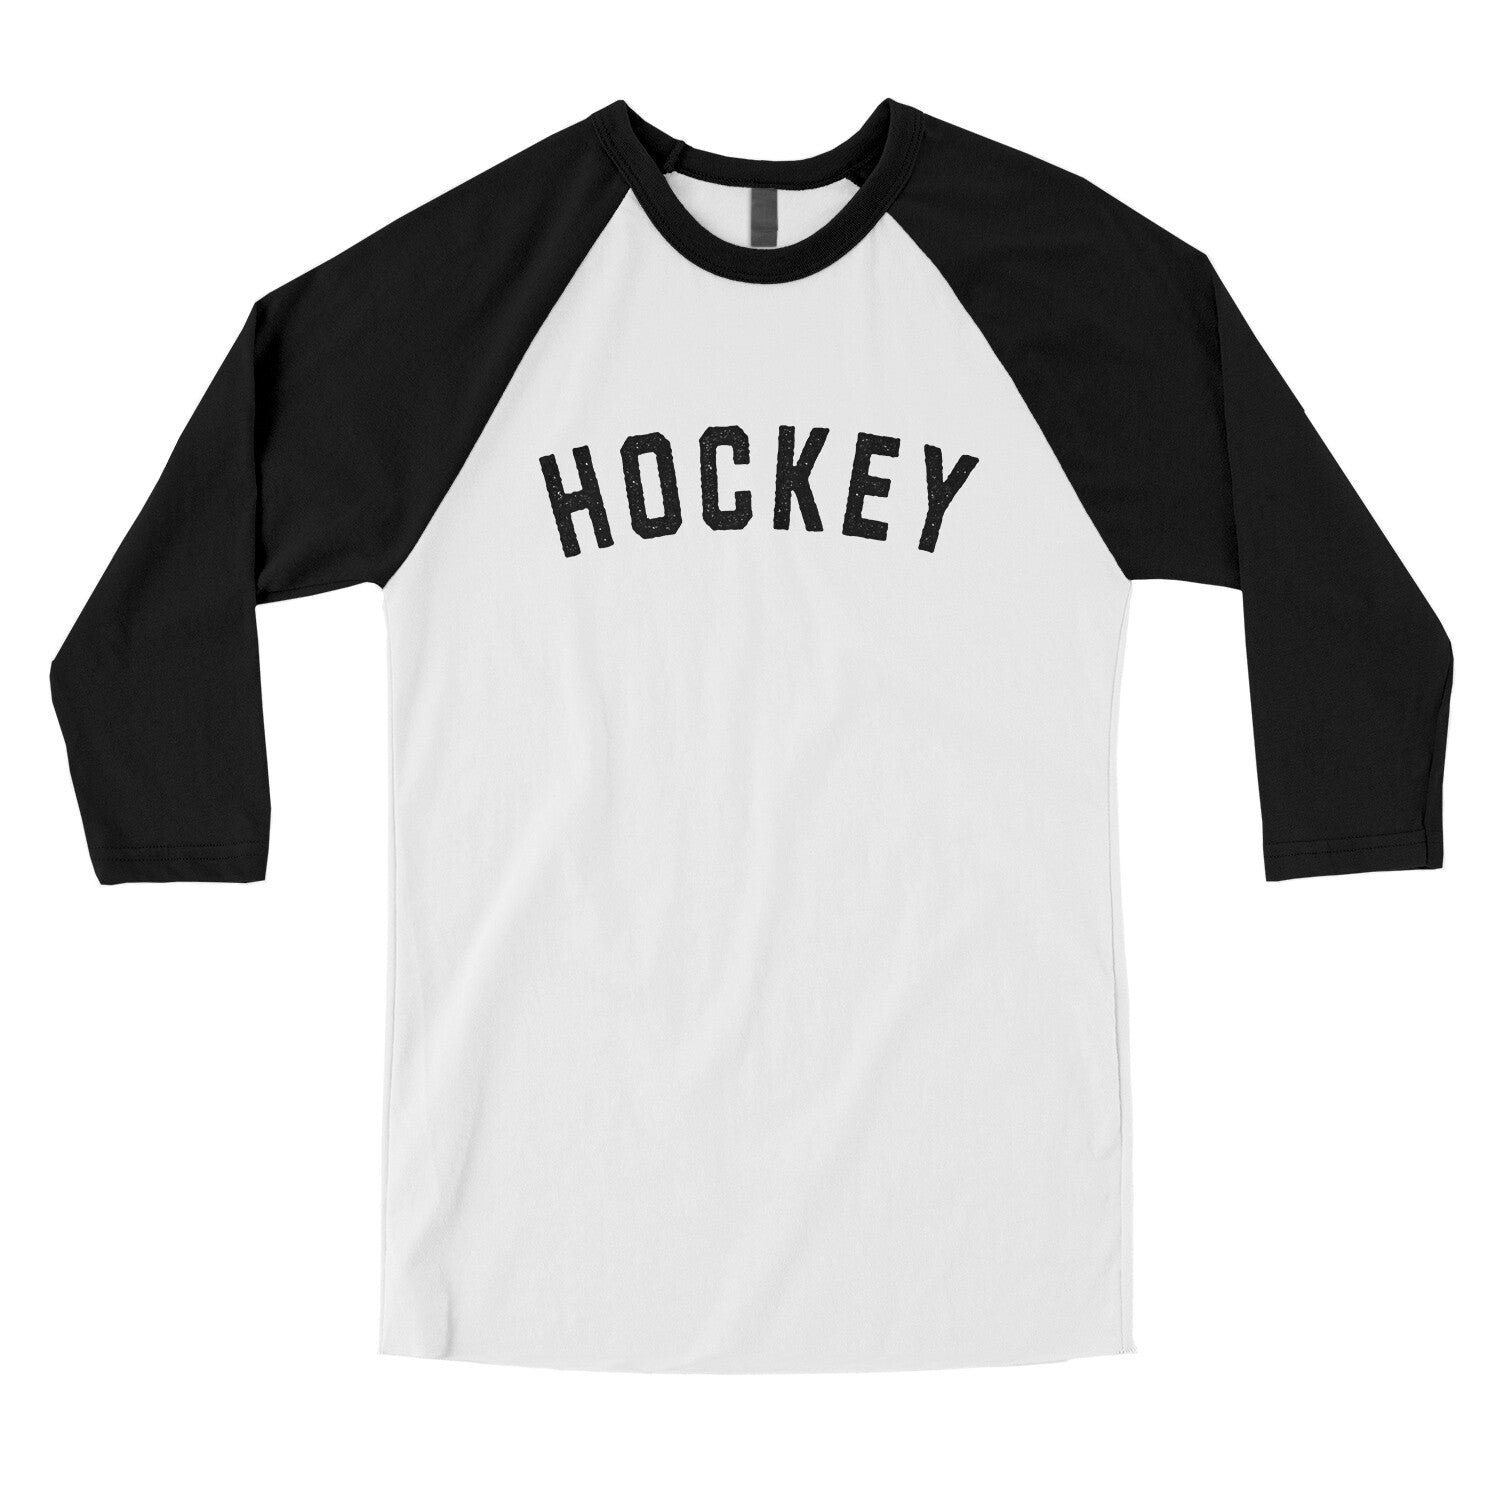 Hockey in White with Black Color